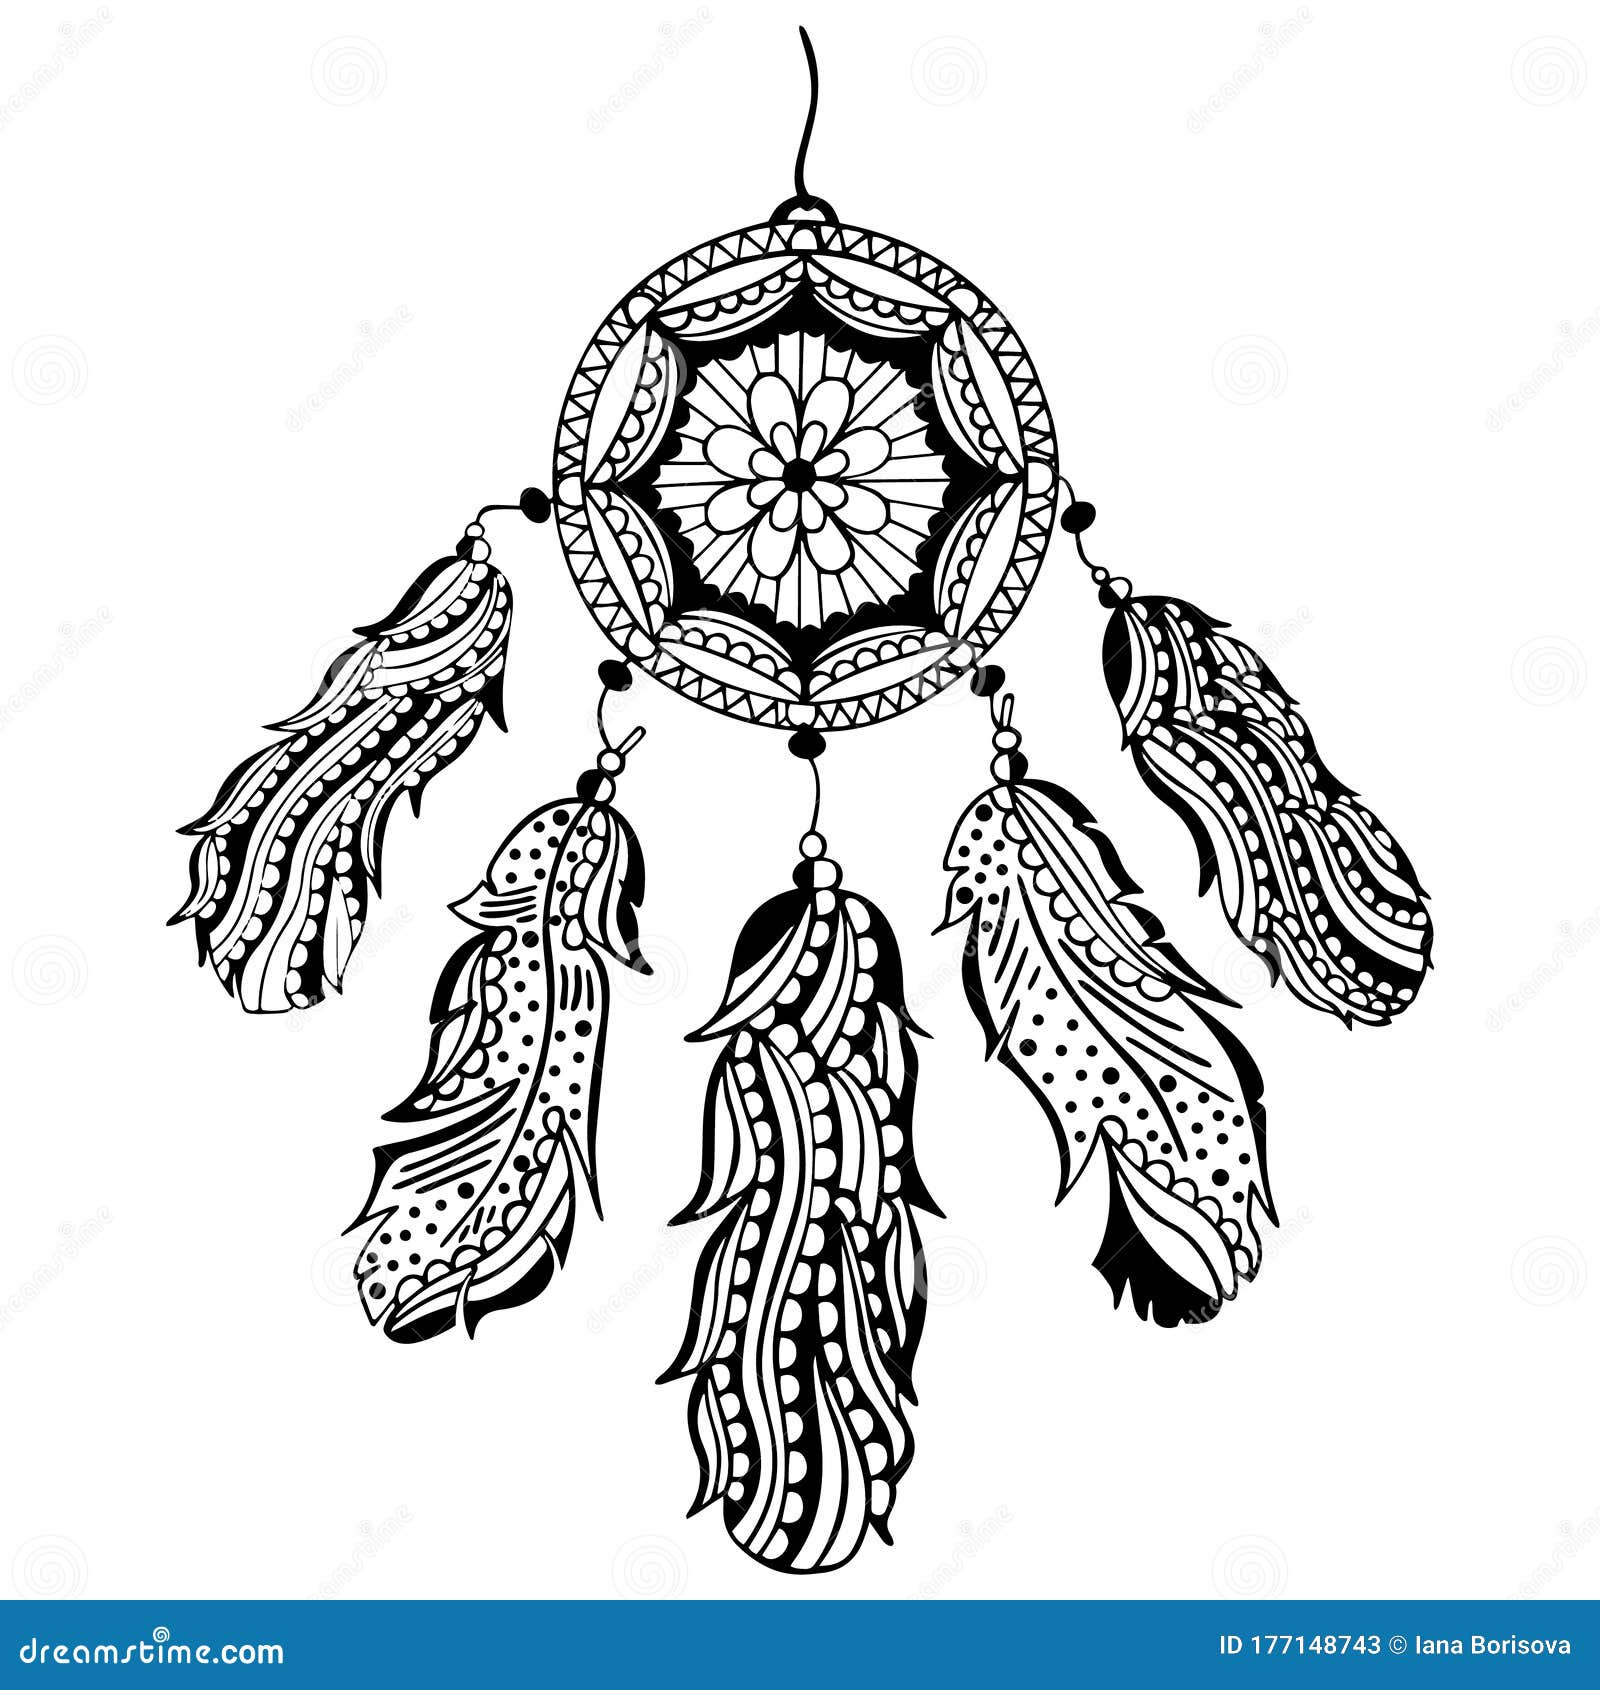 Black and White Hand-drawn Dream Catcher with Feathers and Beads. Native  American Traditional Tribal Symbol Stock Vector - Illustration of aztec,  feathery: 177148743